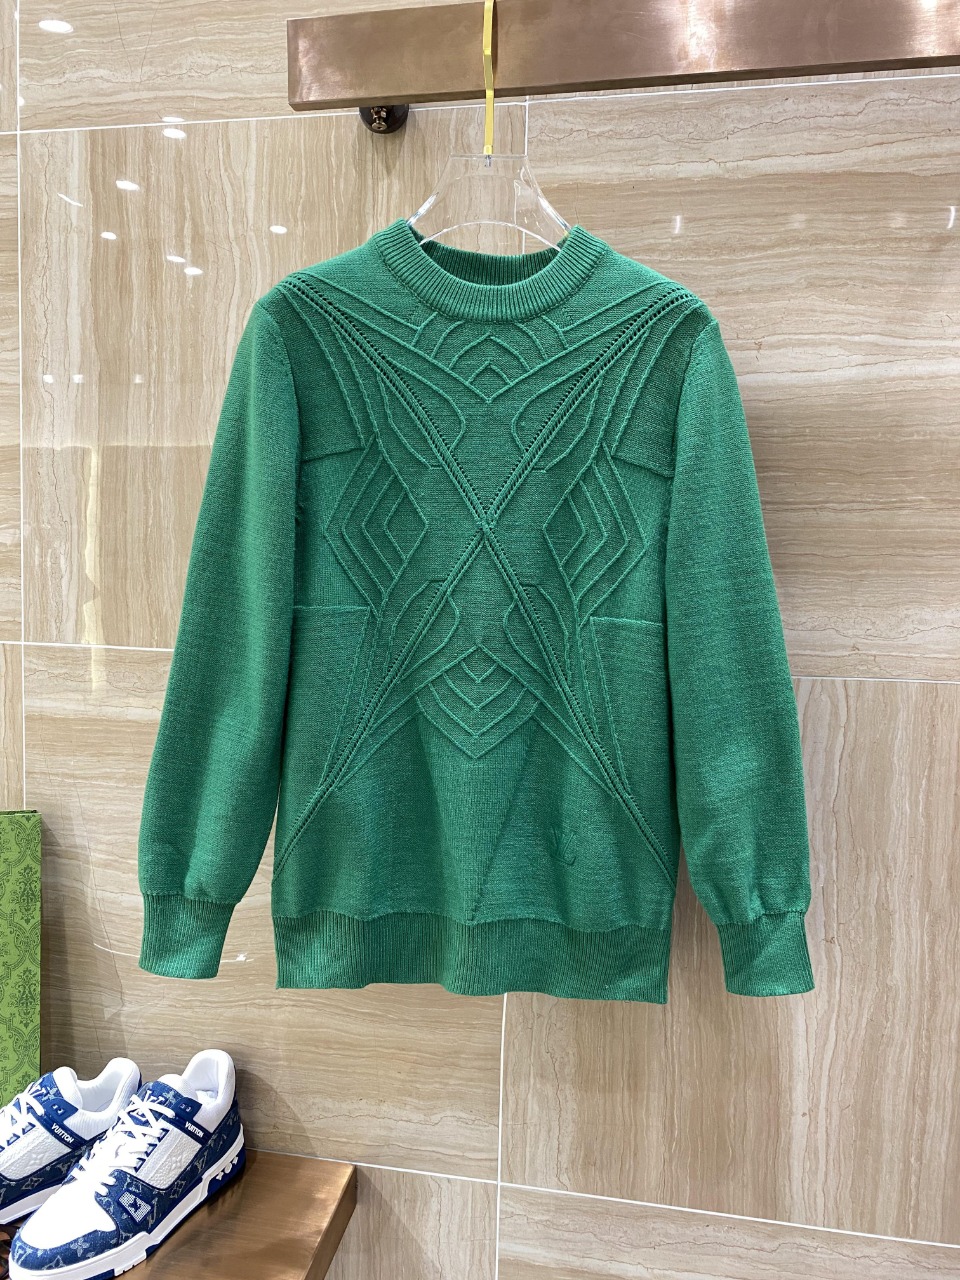 Louis Vuitton Clothing Knit Sweater Openwork Knitting Wool Fall Collection Fashion